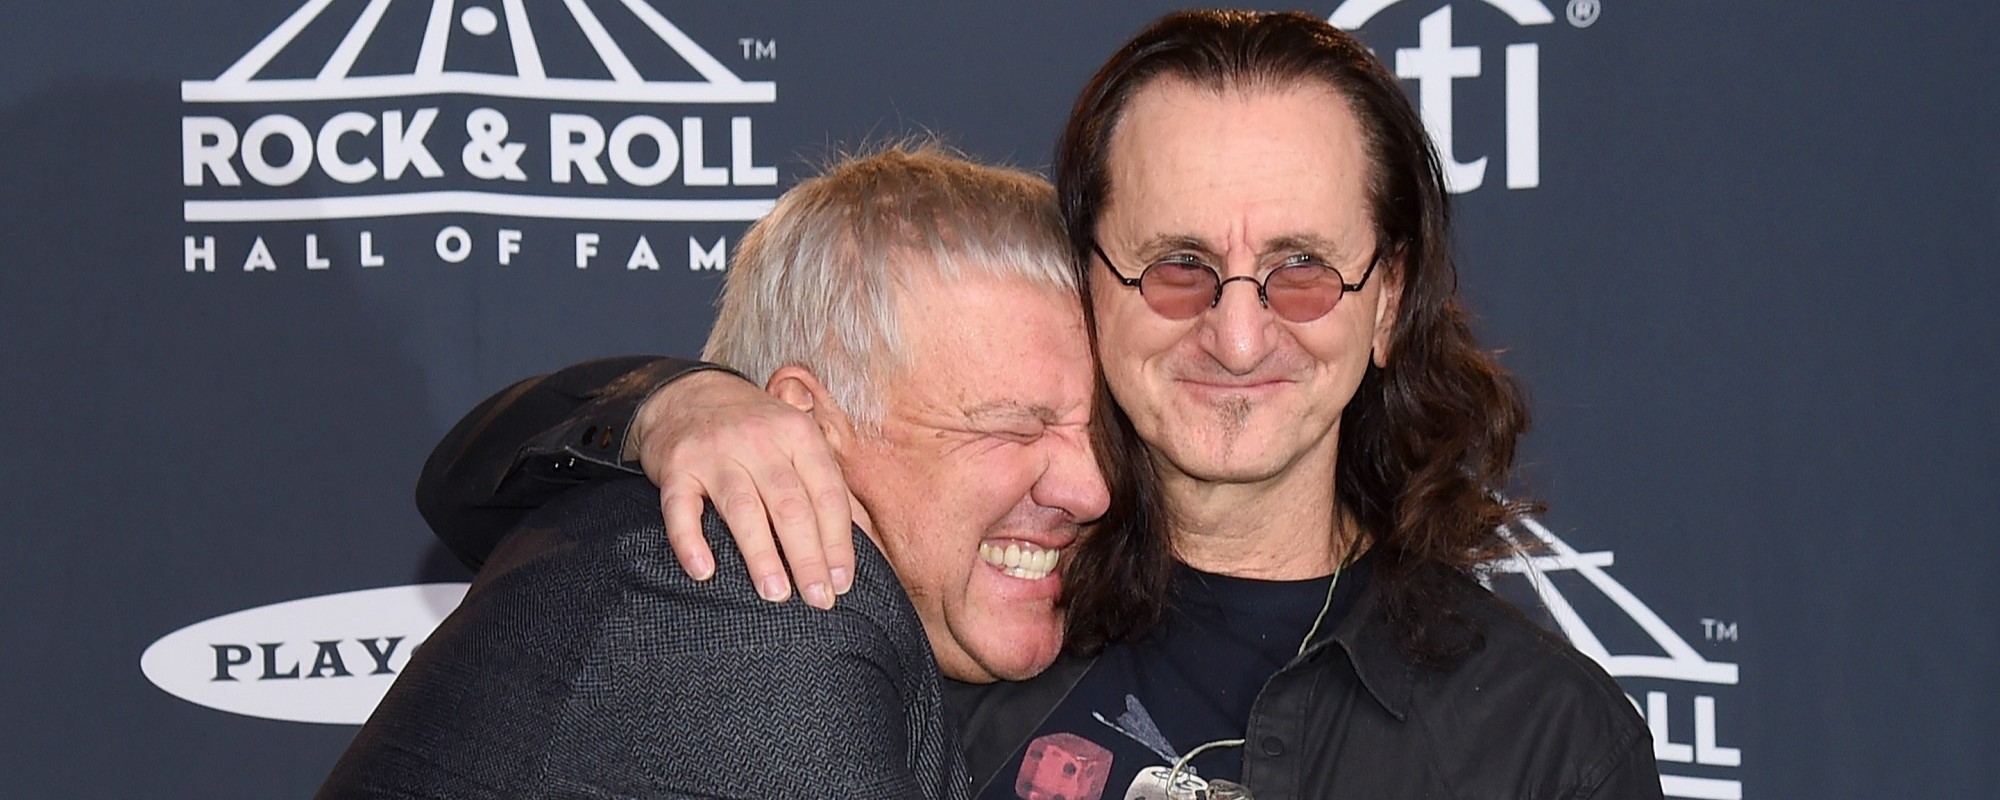 Alex Lifeson Talks “No Brainer” Decision to Rejoin Geddy Lee on Stage and Giving Rush Fans Closure